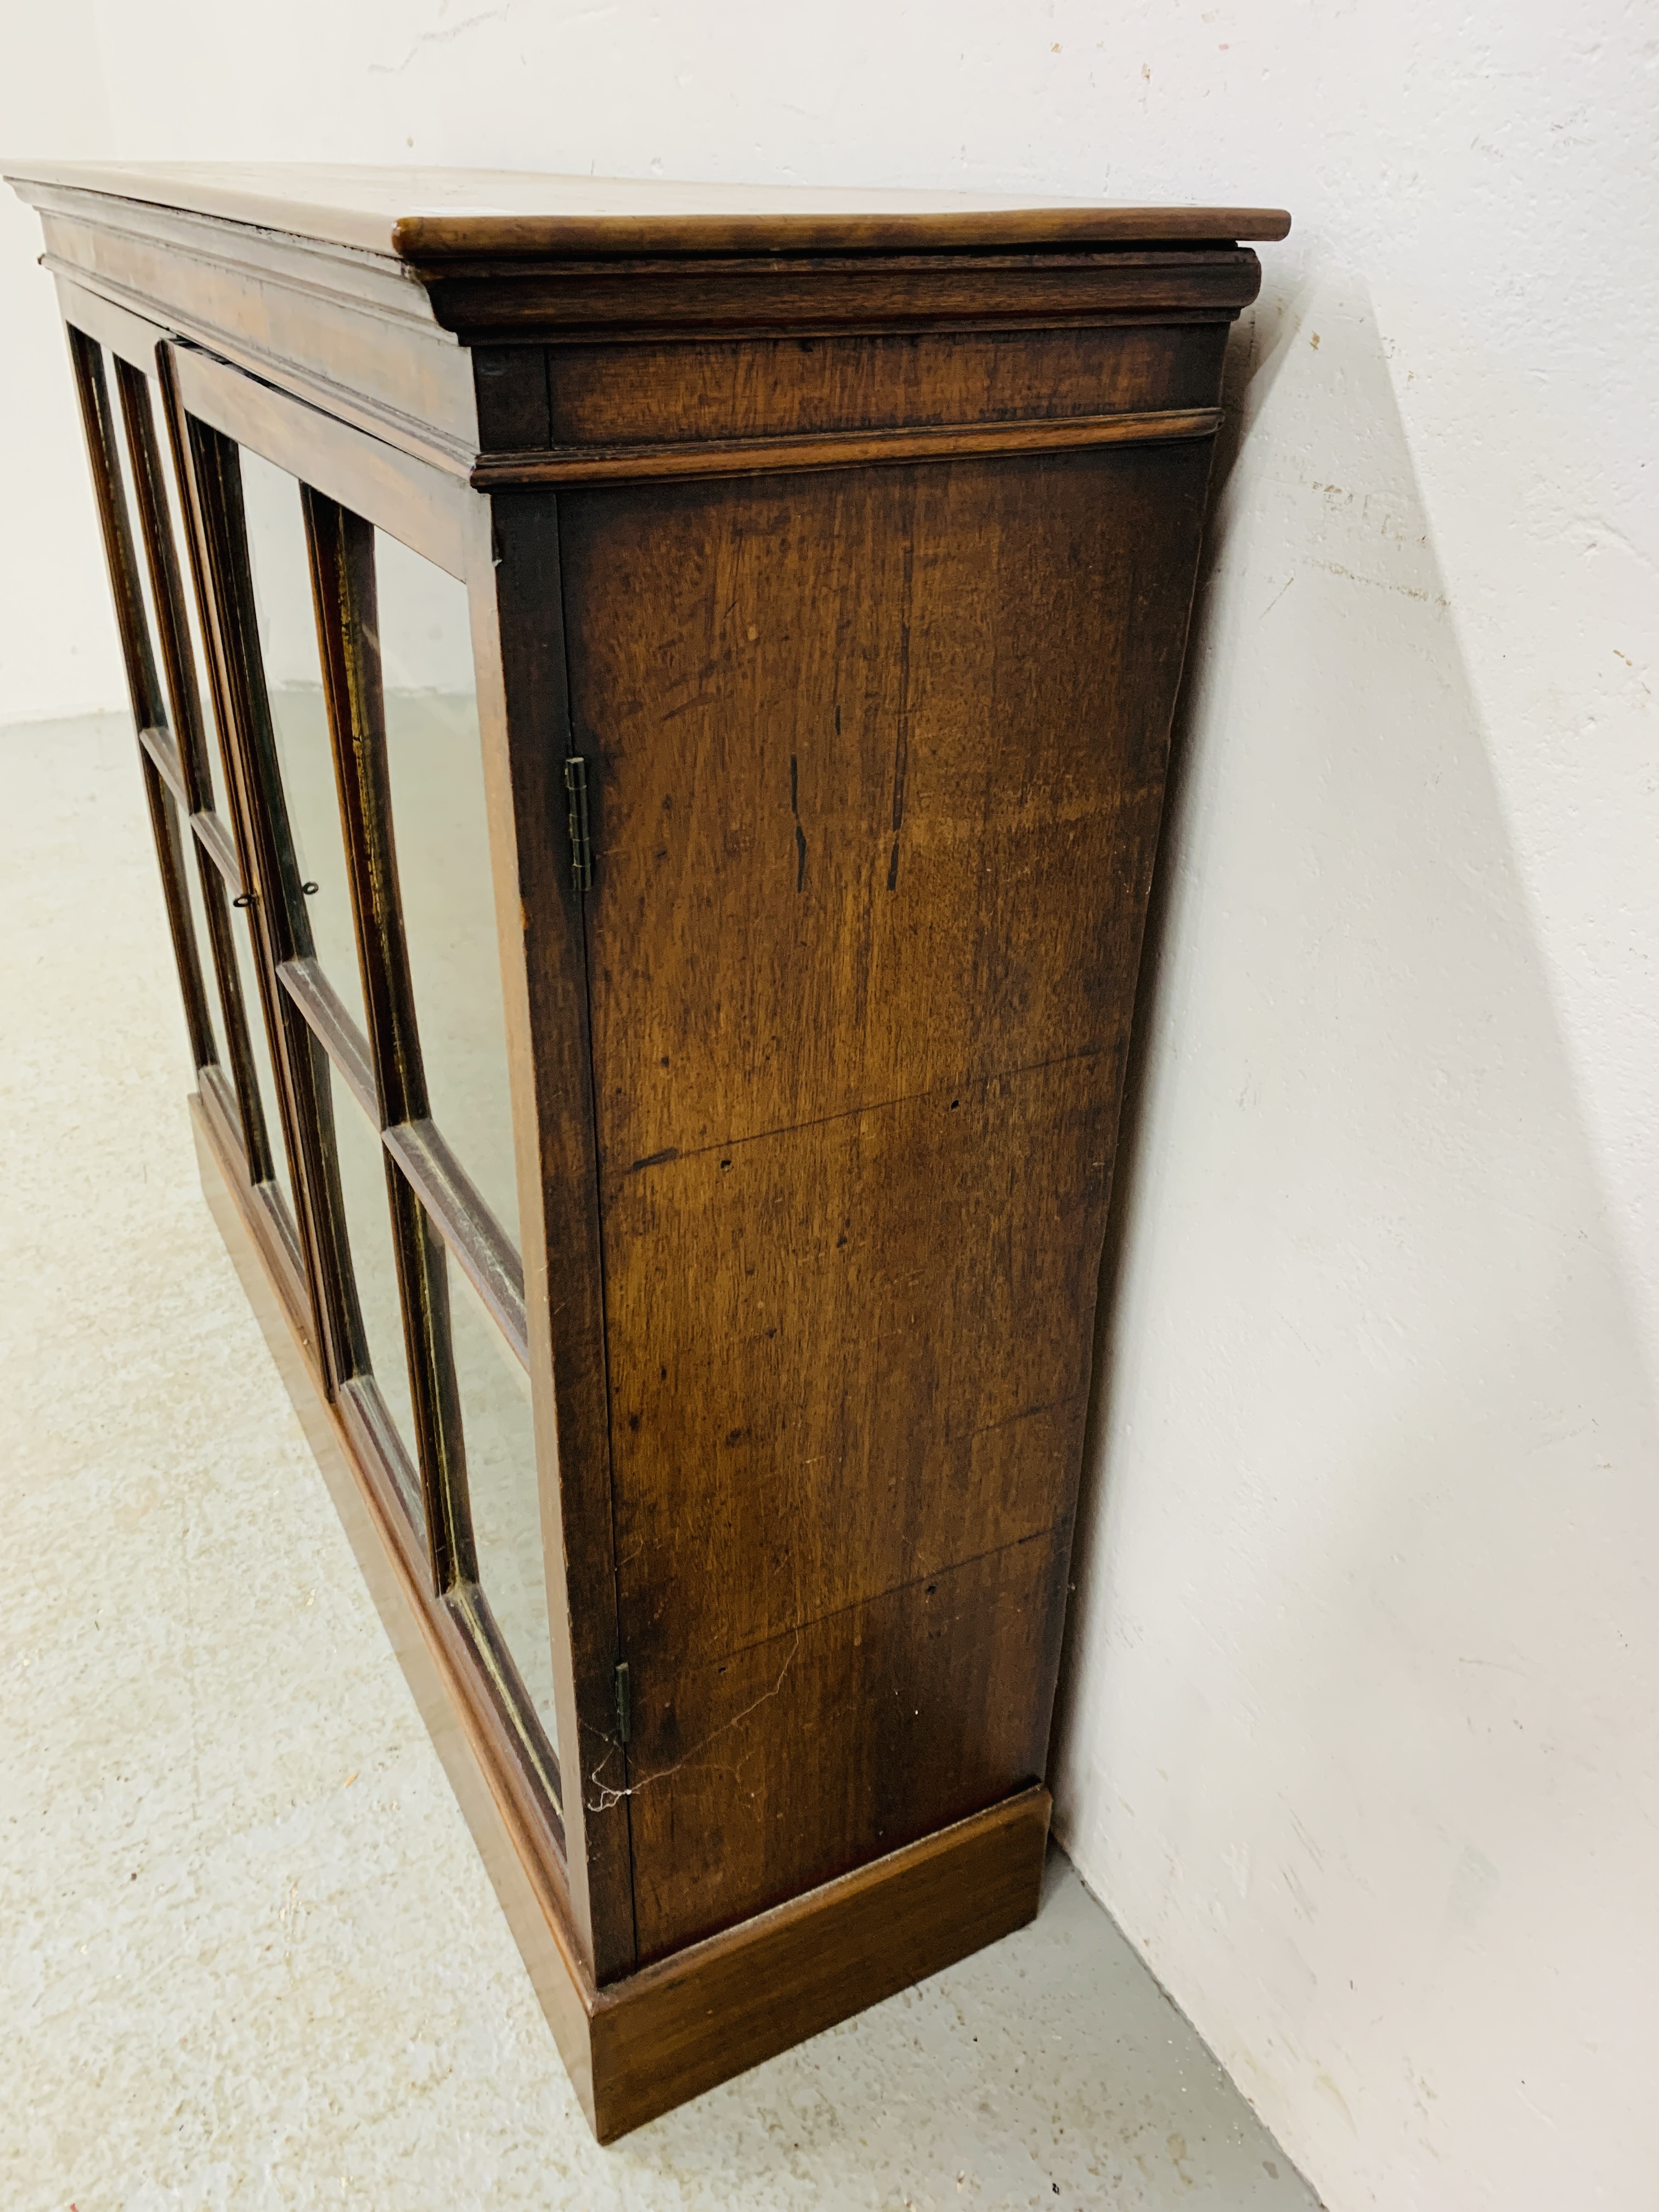 A MAHOGANY TWO DOOR GLAZED DISPLAY CABINET, BEING A TOP HALF OF A BOOKCASE, NOW CONVERTED - W 100CM. - Image 5 of 8